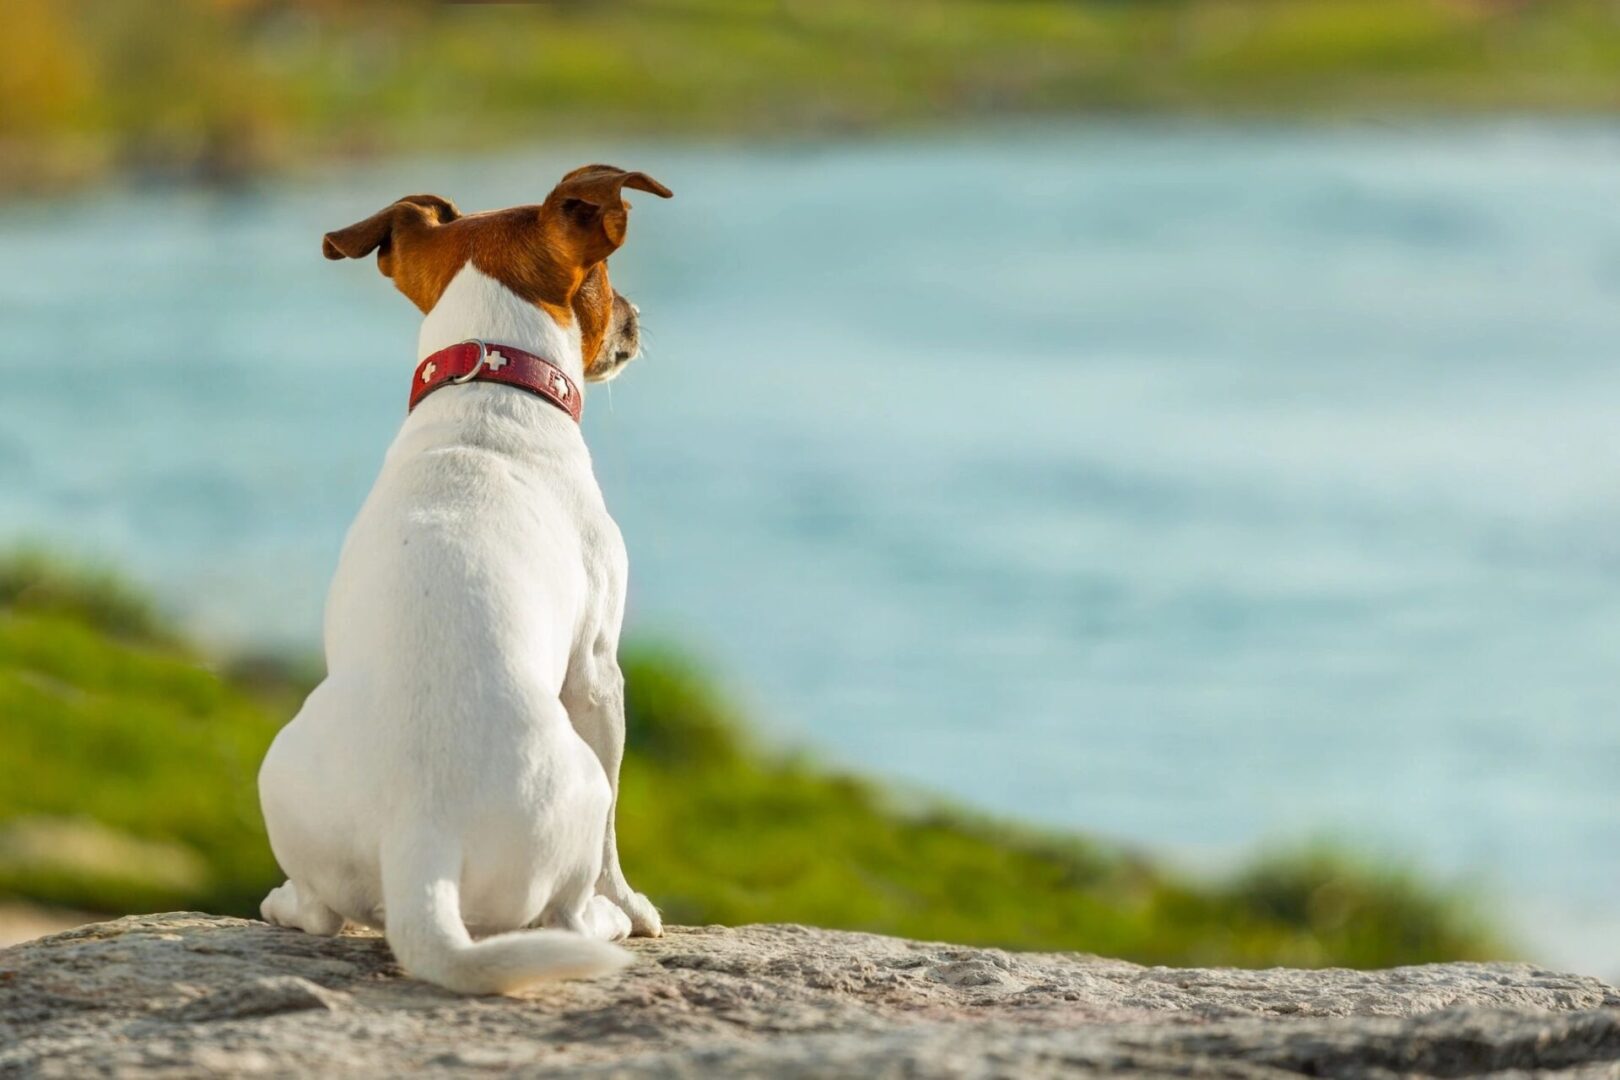 A dog sitting on top of a rock near water.